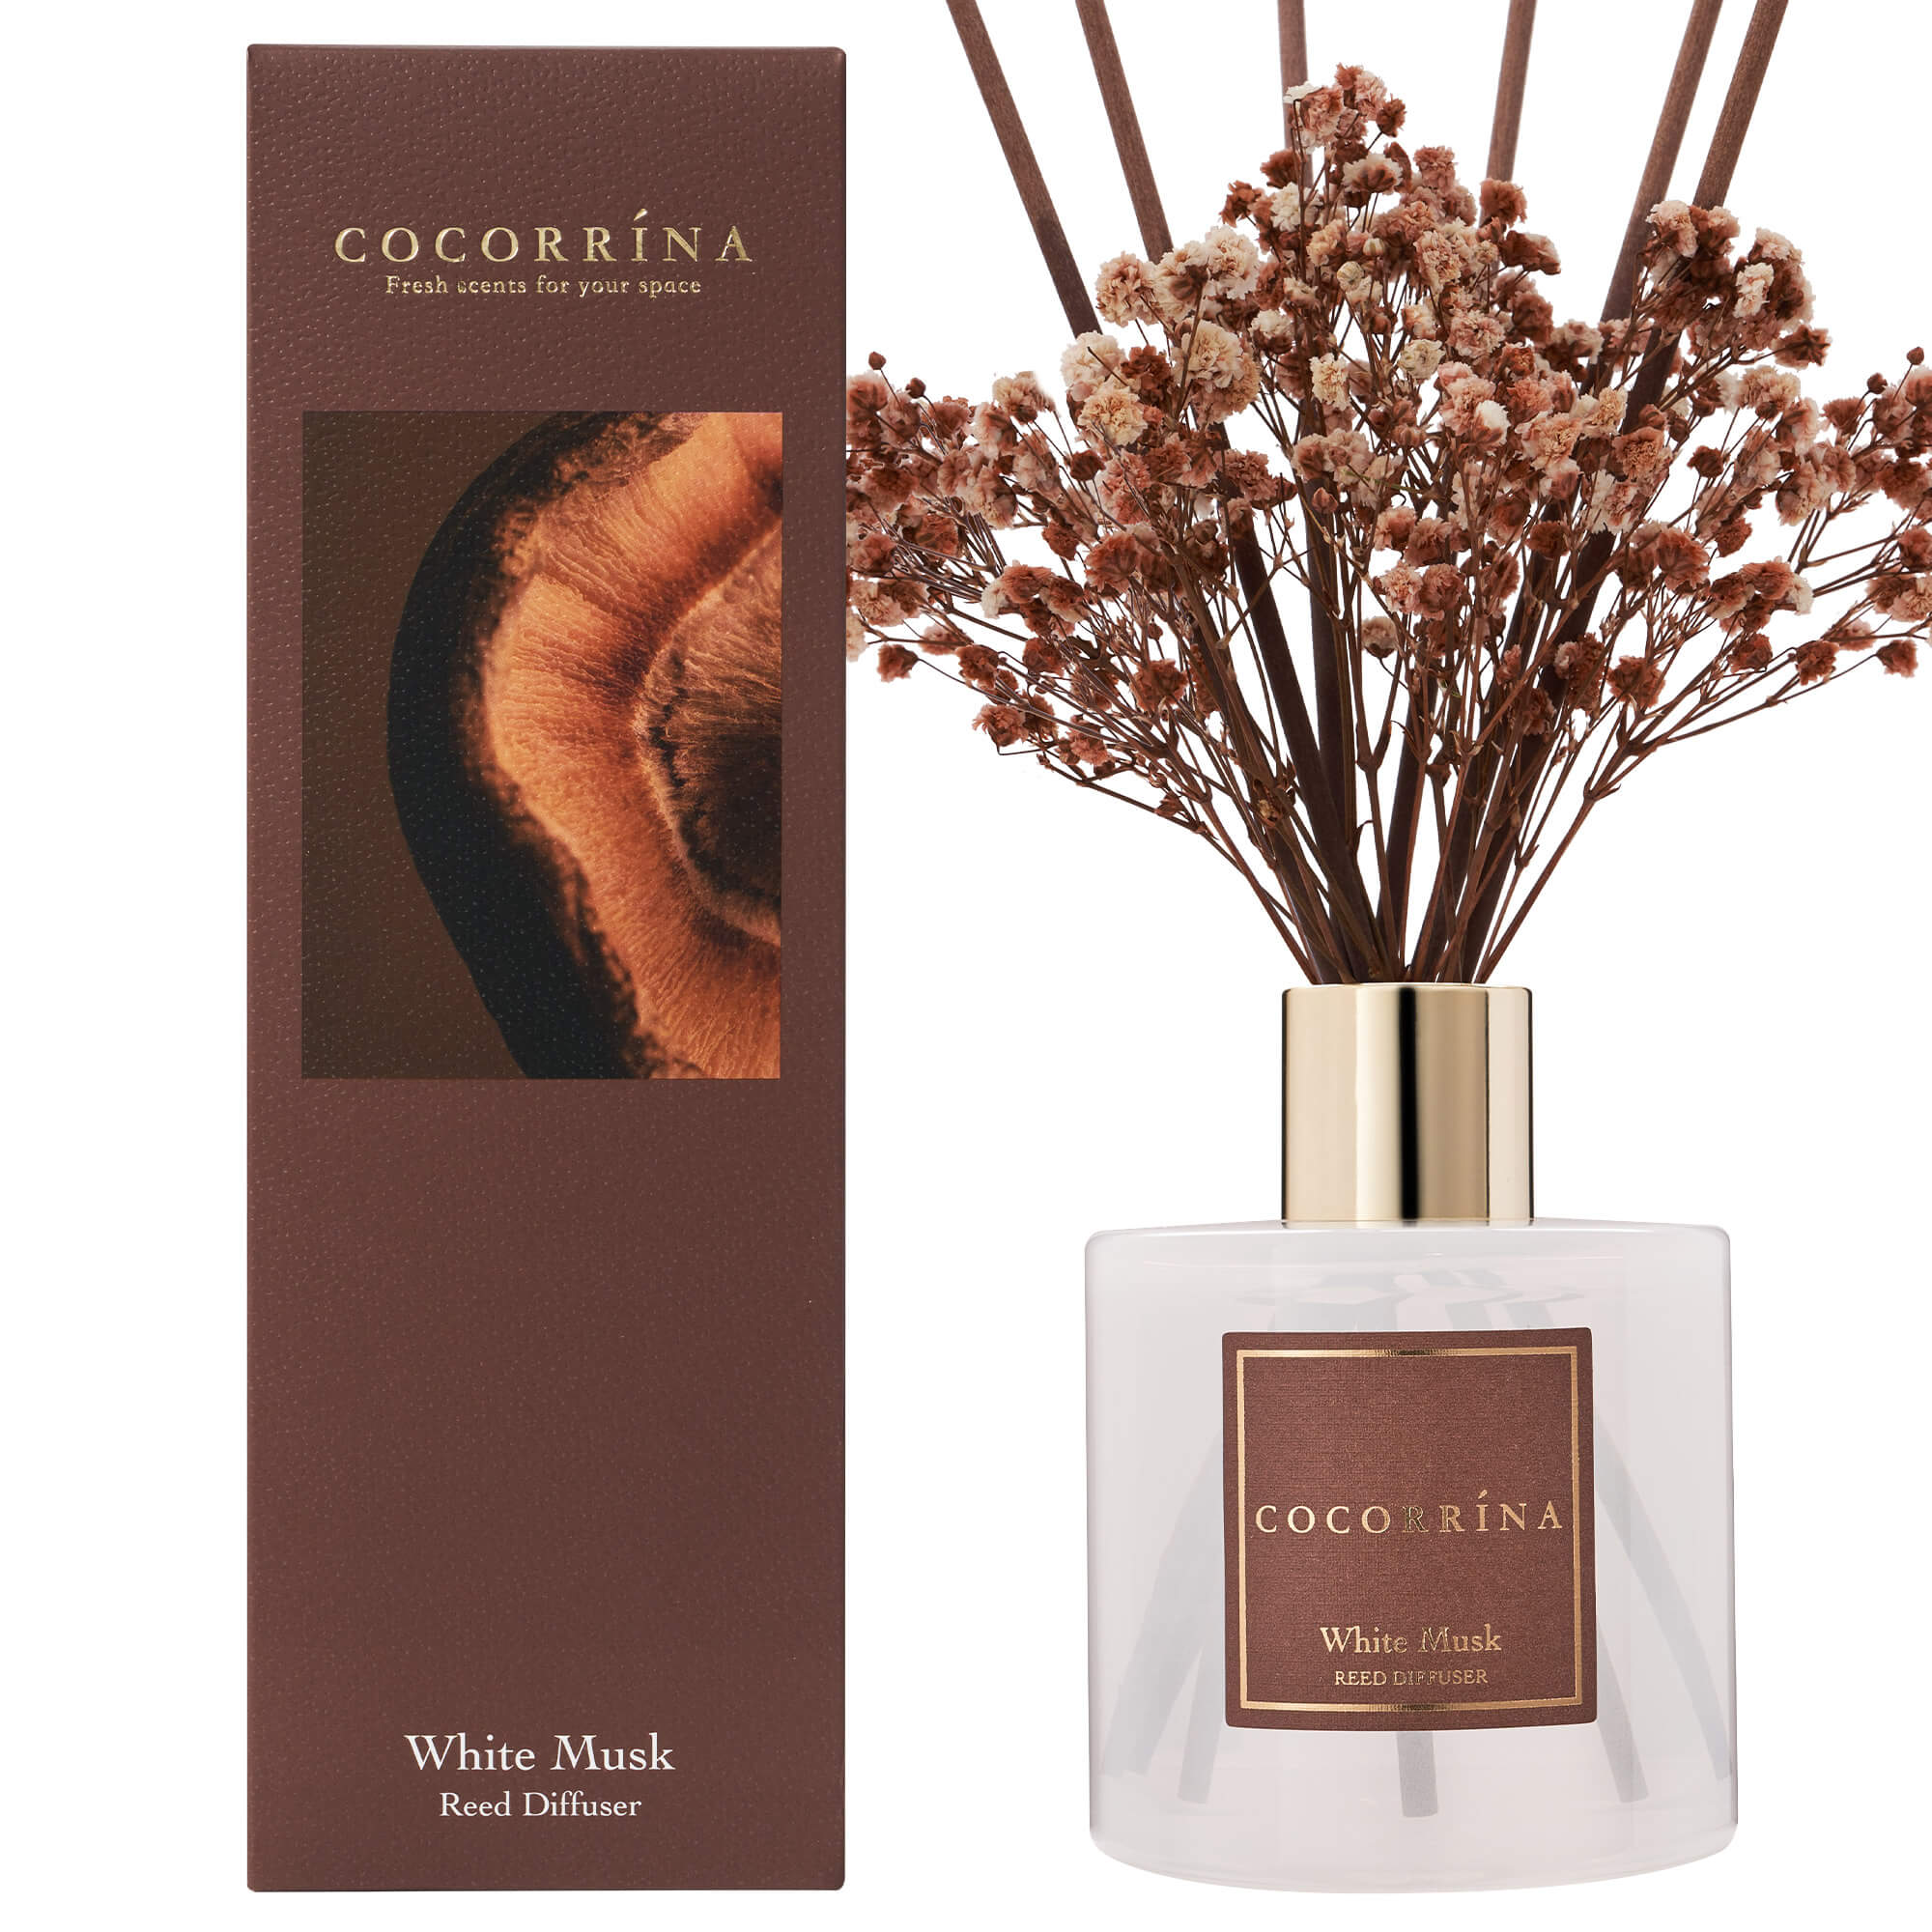 COCORRÍNA White Musk Reed Diffuser Set